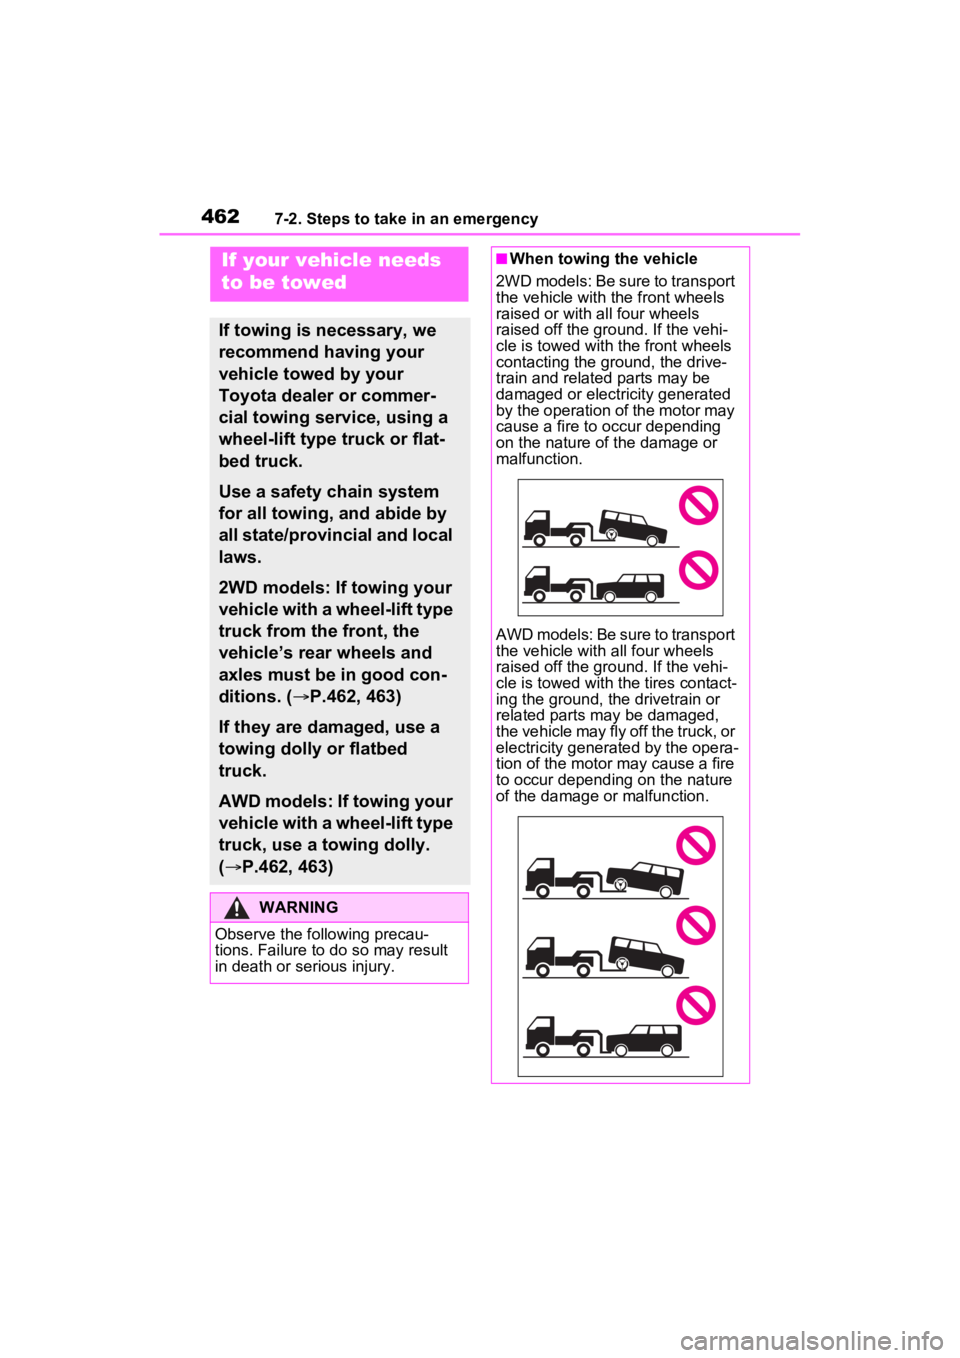 TOYOTA SIENNA HYBRID 2021  Owners Manual (in English) 4627-2. Steps to take in an emergency
7-2.Steps to take in an emergency
If your vehicle needs 
to be towed
If towing is necessary, we 
recommend having your 
vehicle towed by your 
Toyota dealer or co